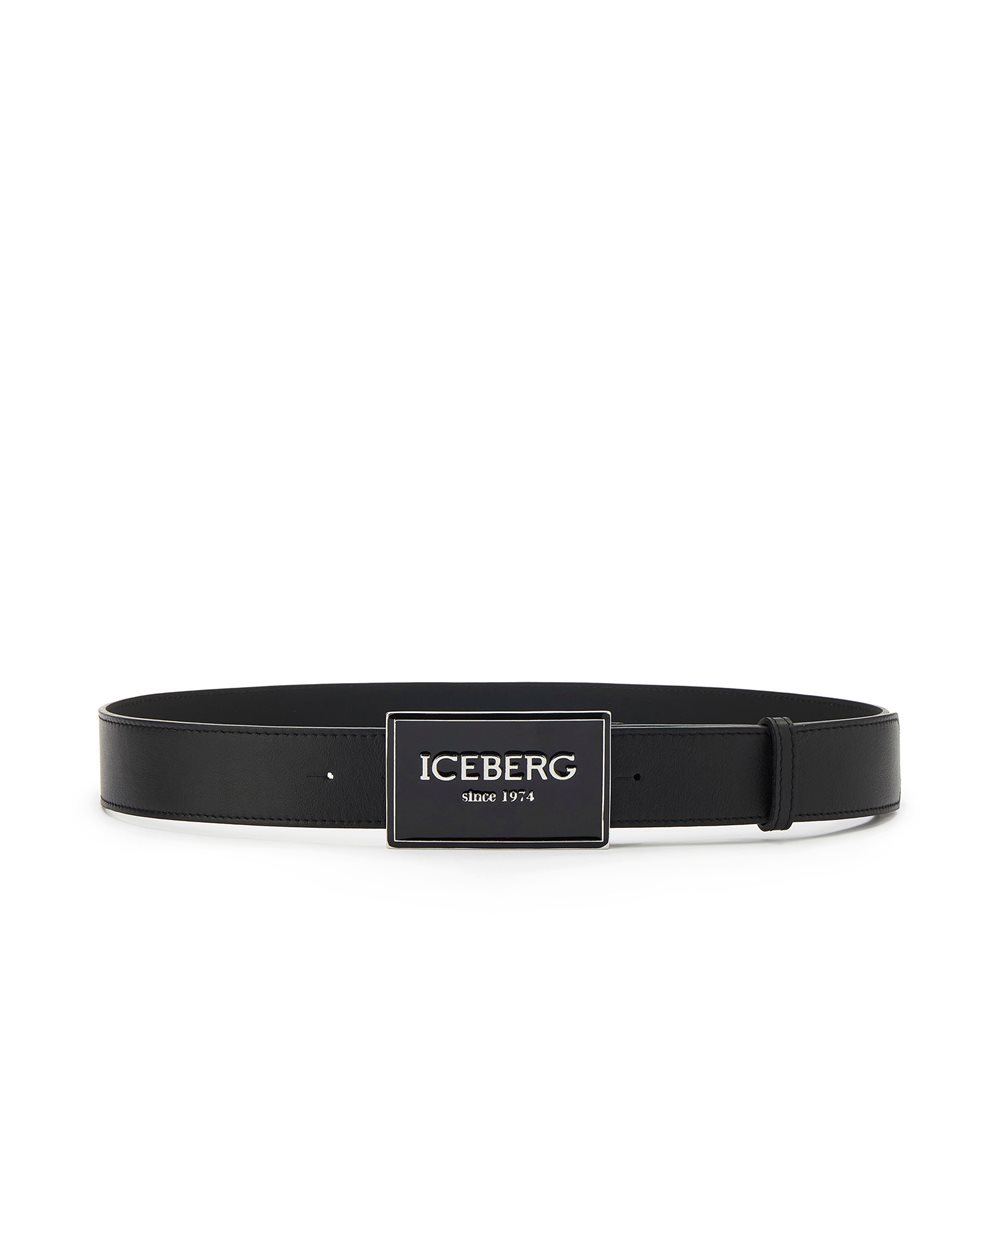 Leather belt with logoed buckle -  ( PRIMO STEP DE ) PROMO SALDI UP TO 30% | Iceberg - Official Website